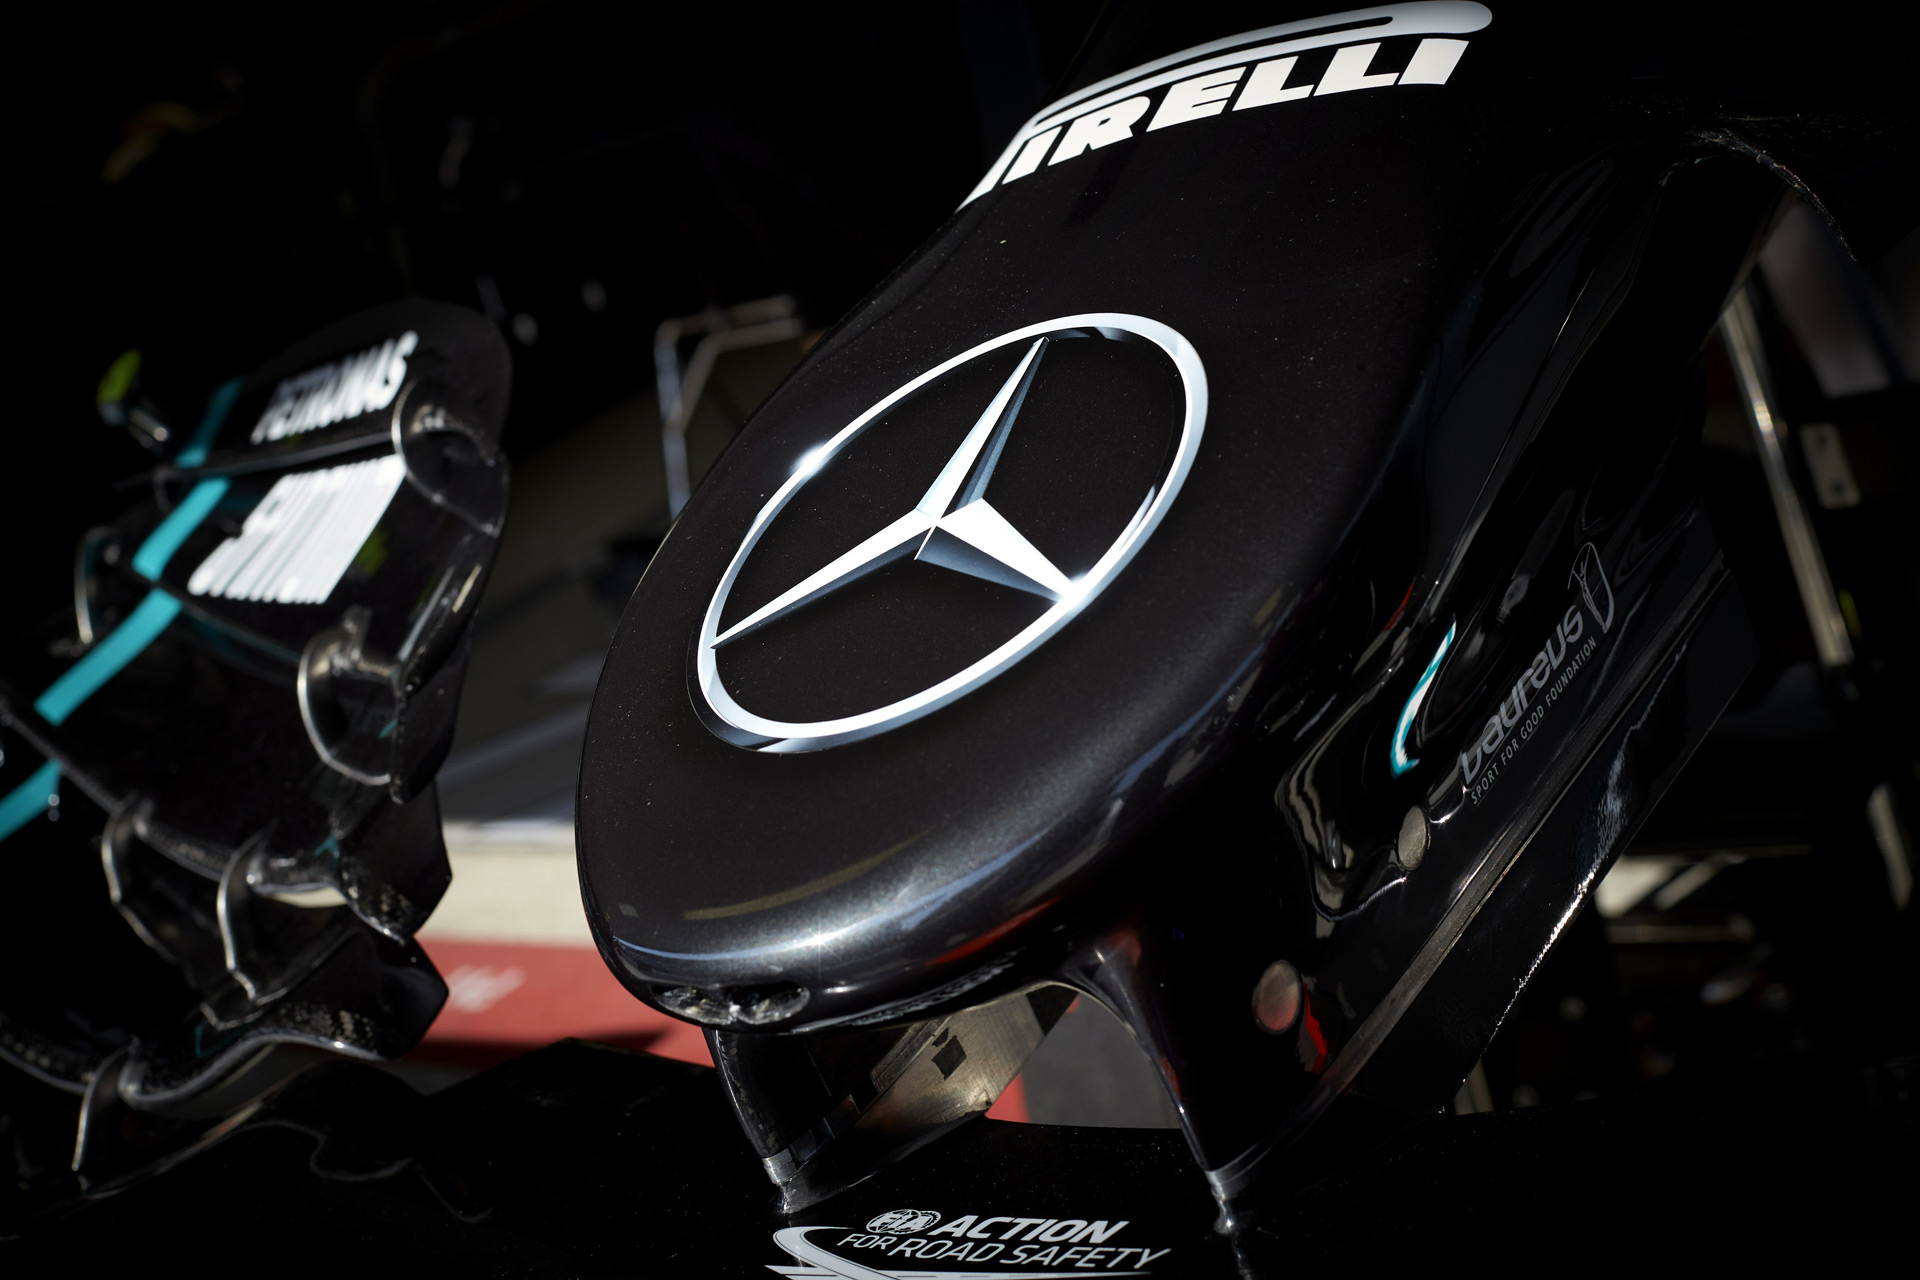 Daimler will be losing control of Mercedes F1 team